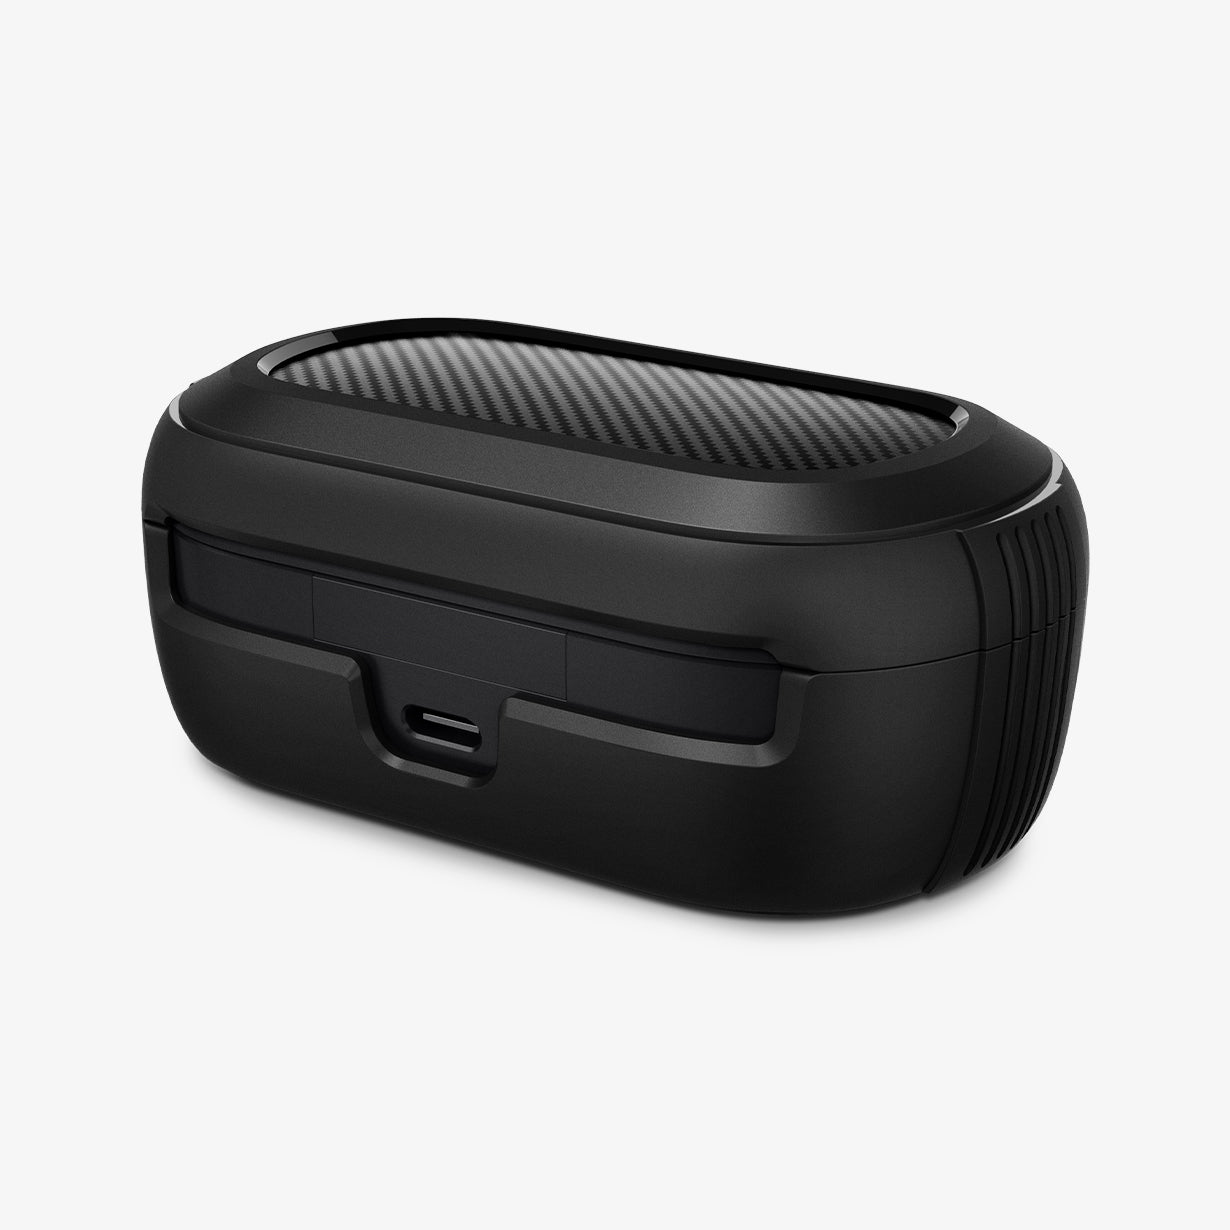 ASD02487 - Bose Earbuds Quiet Comfort Case Rugged Armor in black showing the back, side and partial top